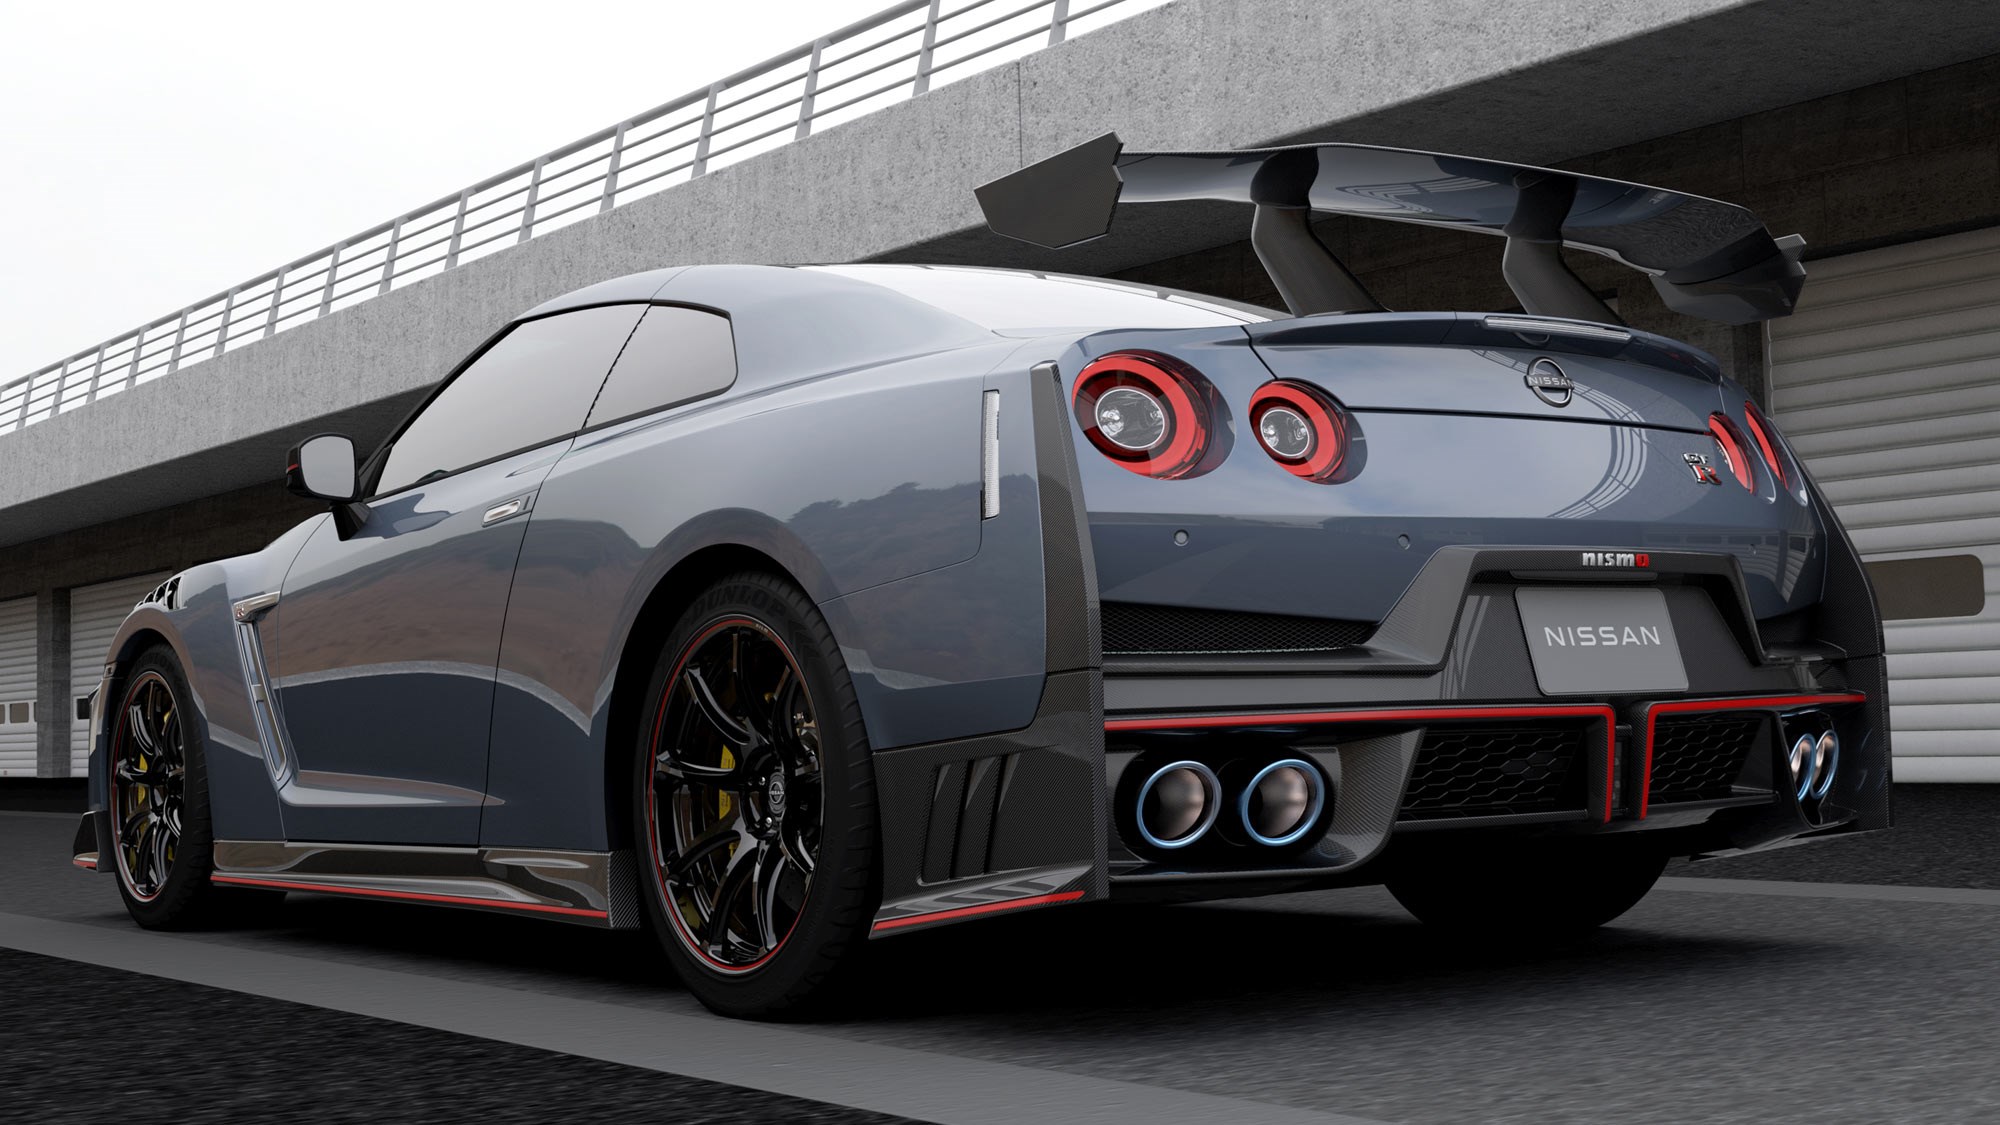 https://car-images.bauersecure.com/wp-images/3478/093-nissan-gt-r-nismo-special-edition-rear.jpg